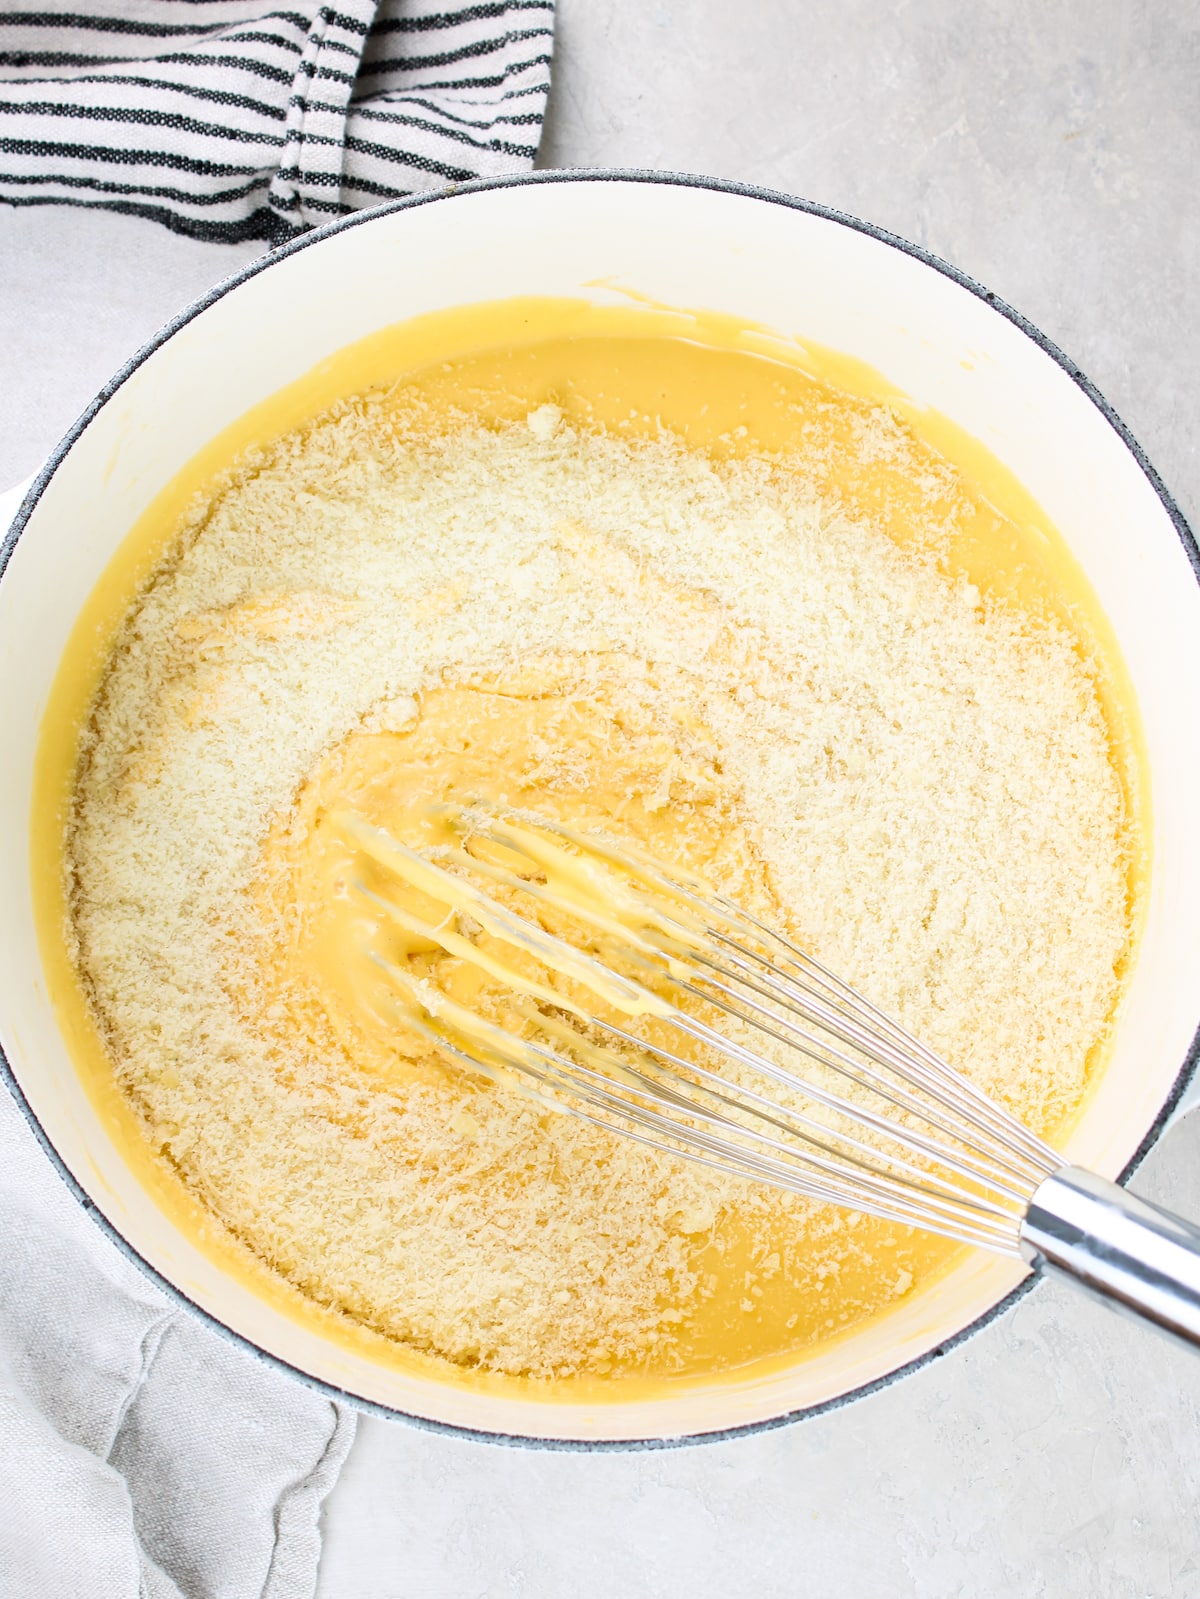 Parmesan cheese added to the roux.